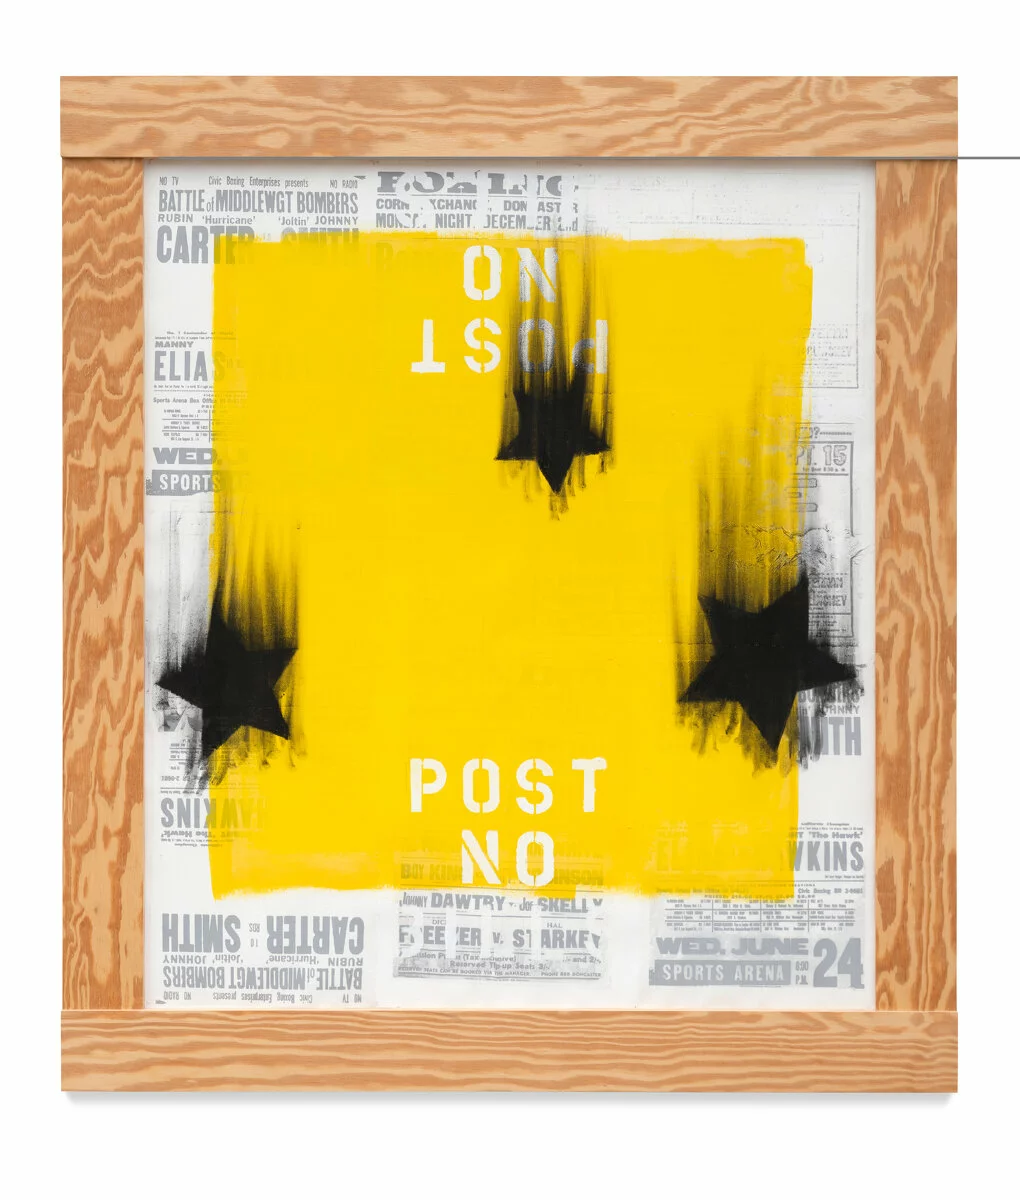 An artwork featuring a yellow square painted over printed black-and-white advertisements. On the top and bottom of the square is white text reading Post No; the top text is upside down. Over the entire artwork are three black stars that seem as if they are falling based on the streaks.